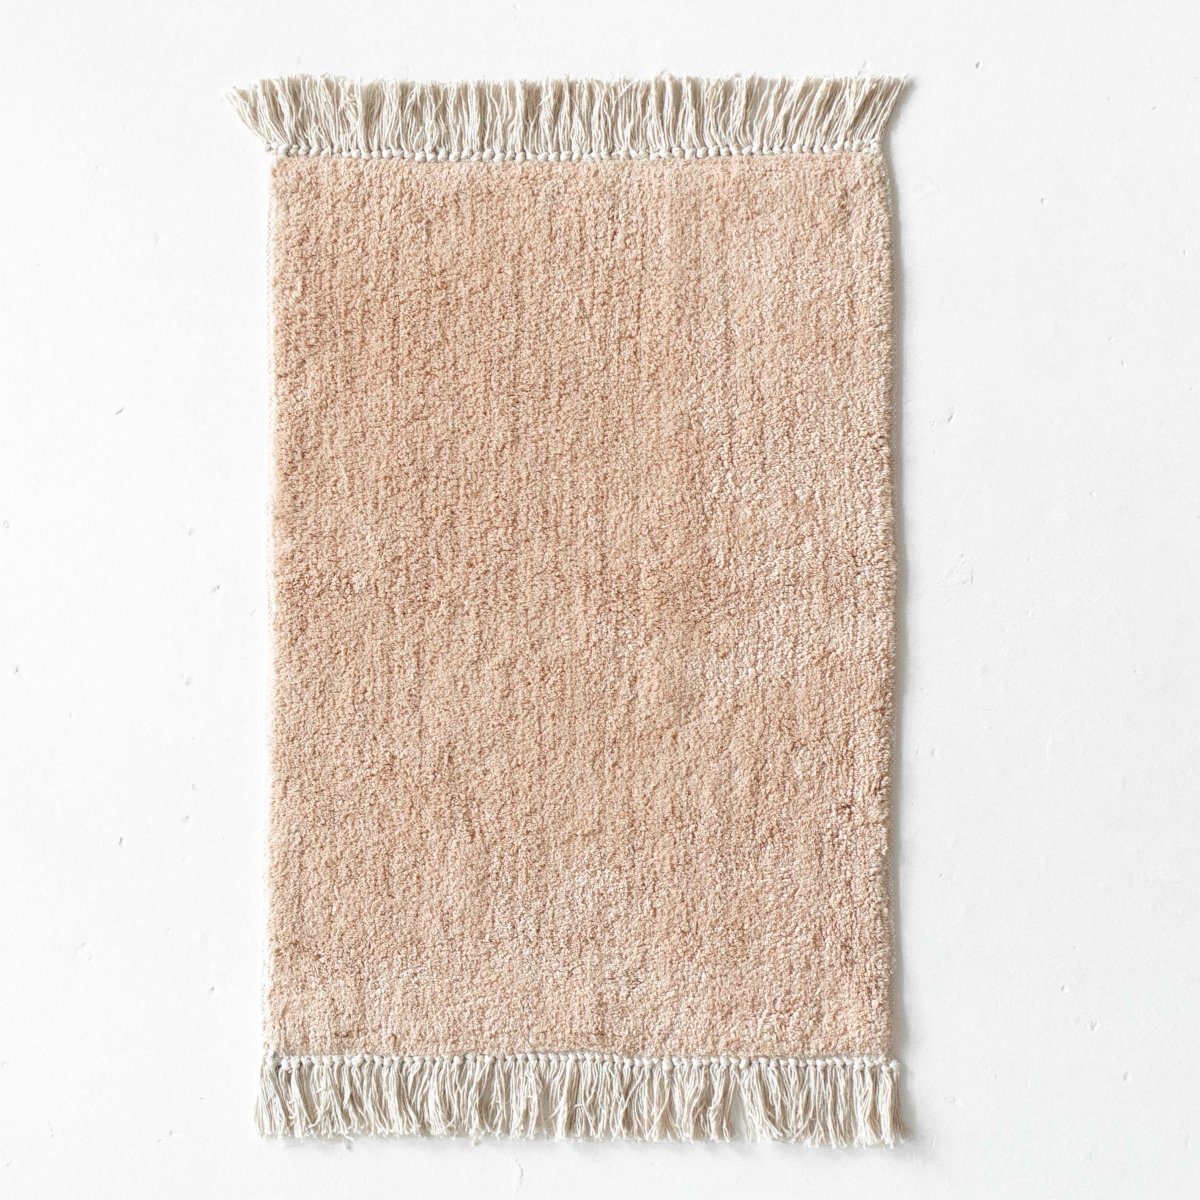 Load image into Gallery viewer, Rugs Dream Beige Rug Bath Mat - With Tassels